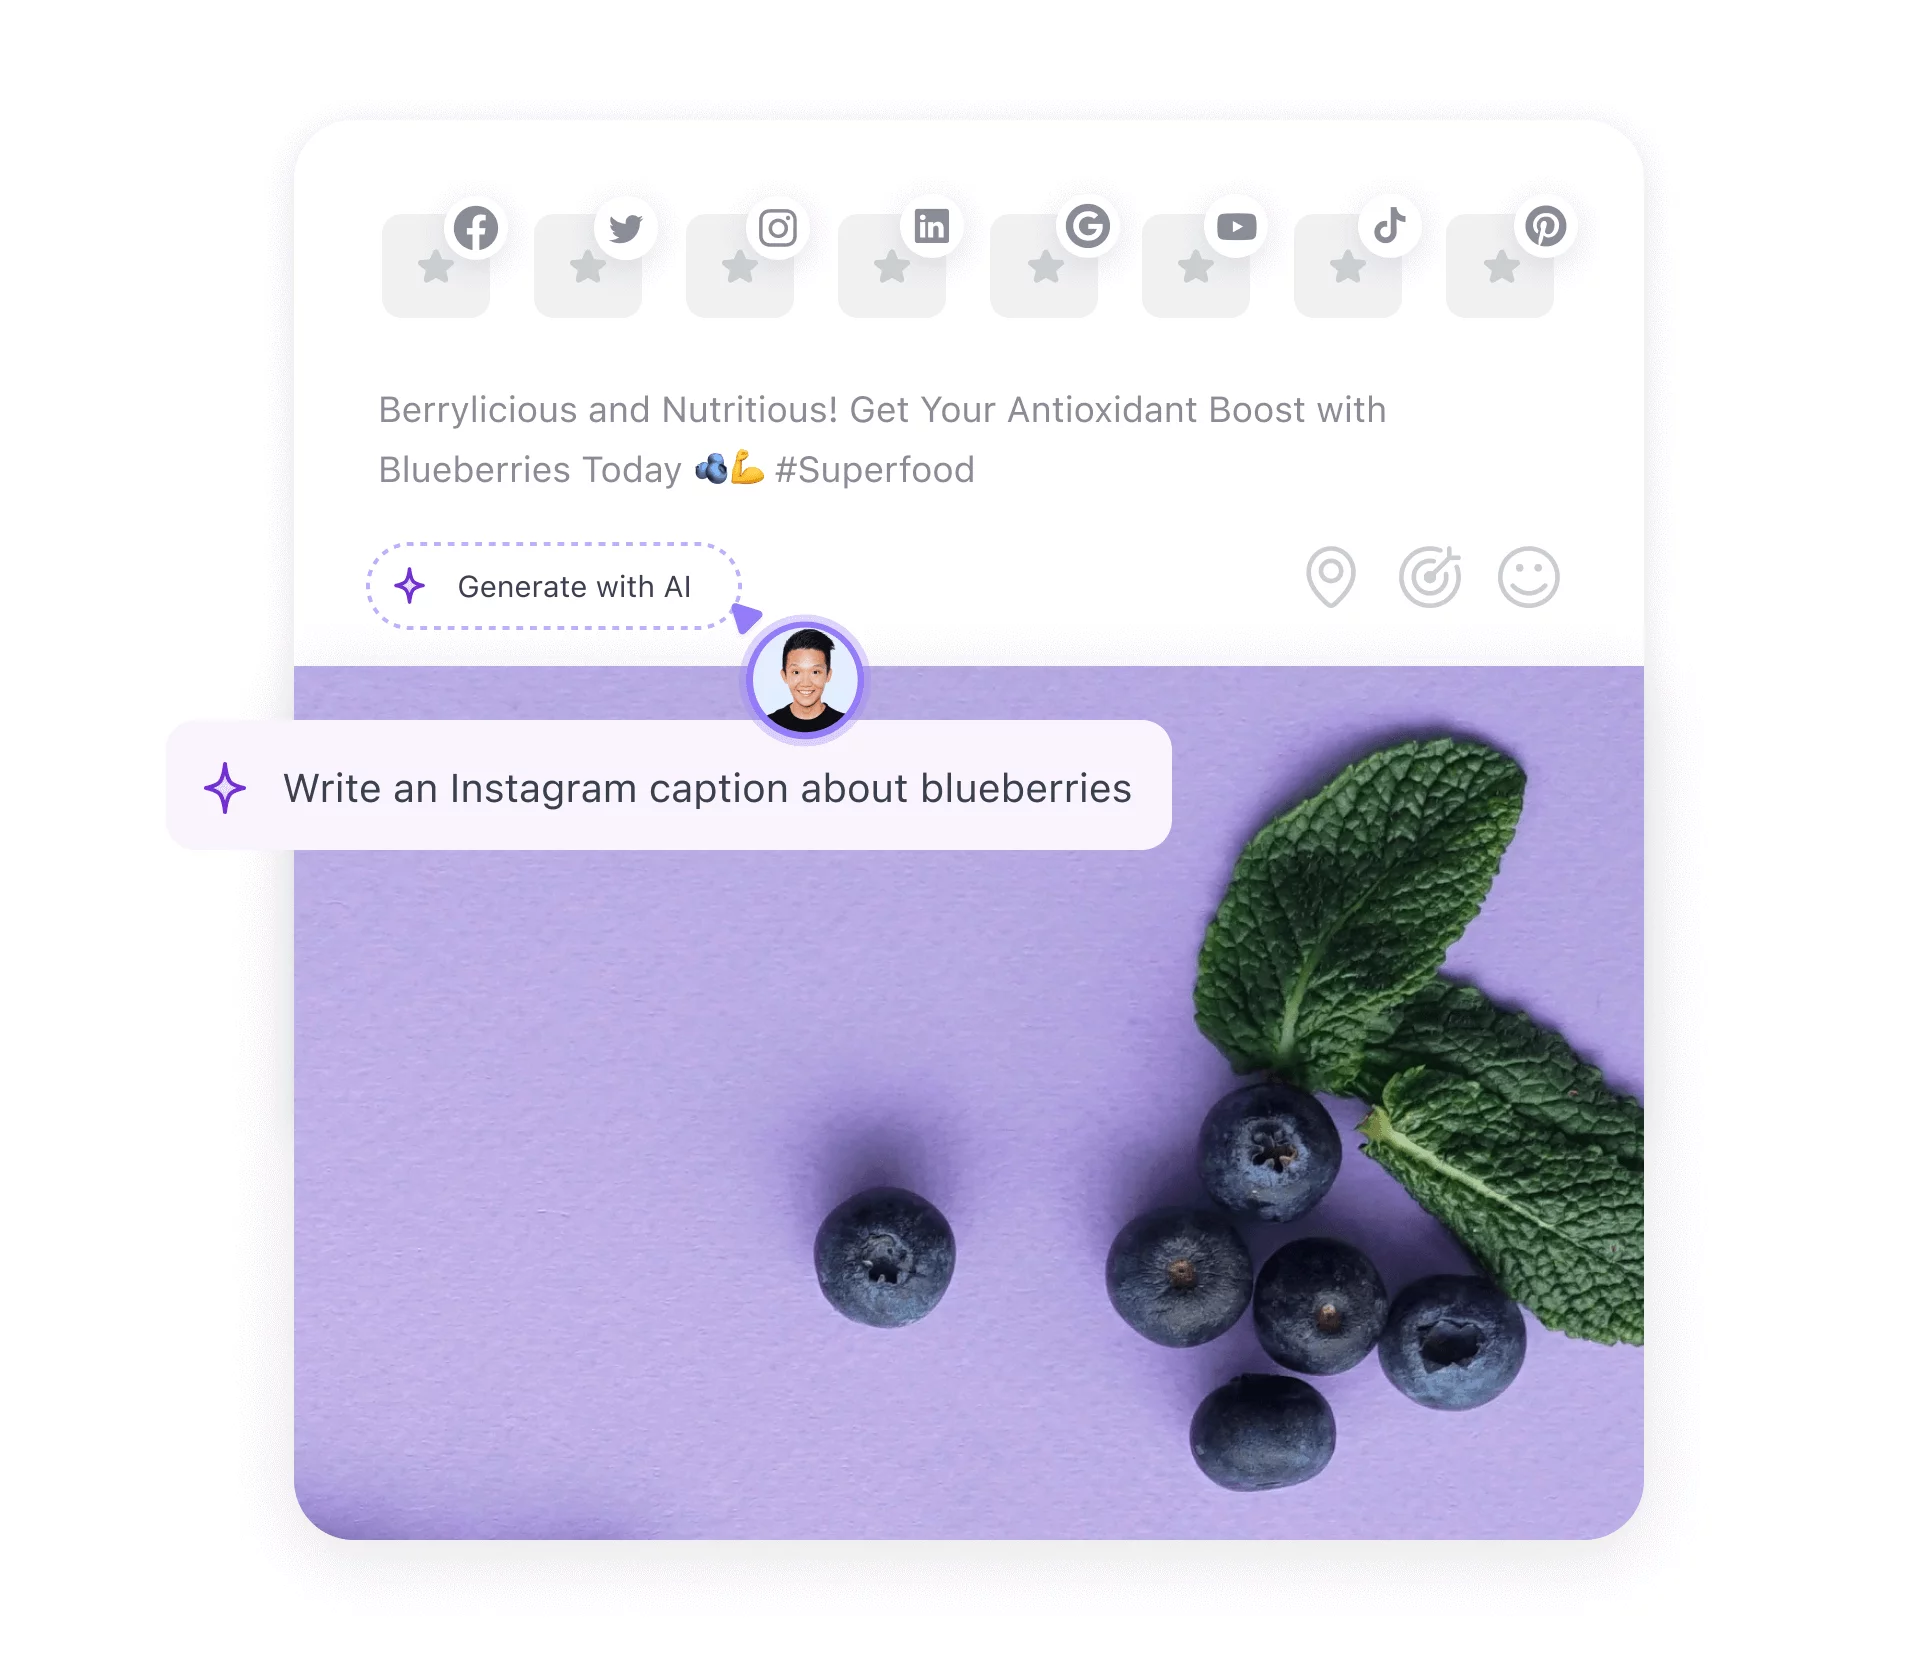 Social media post draft, with the image of blueberries on a purple background, with the option to Generate with AI